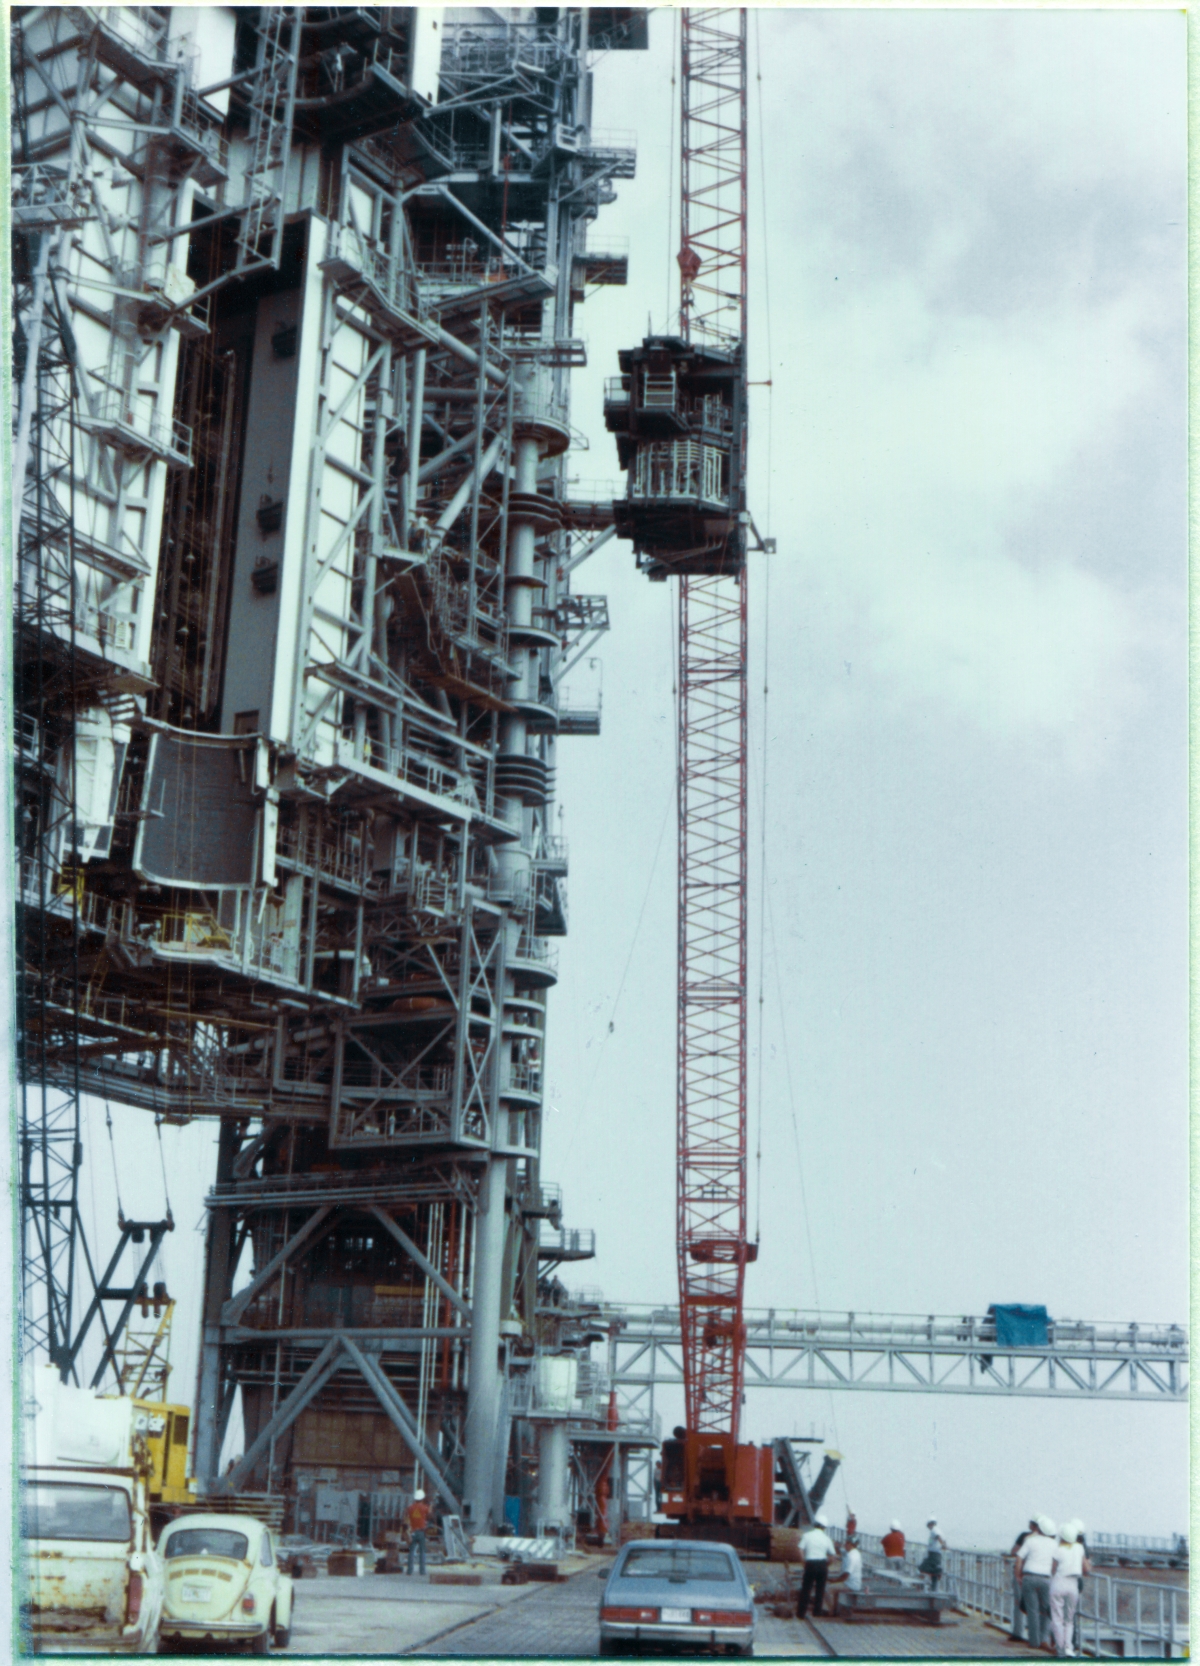 Image 092. At Space Shuttle Launch Complex 39-B, Kennedy Space Center, Florida, the Orbiter Mid-Body Umbilical Unit Lift has proceeded to the point where the OMBUU has reached its final elevation, and will soon be swung in toward the Rotating Service Structure, with the crane operator booming right, to do so. The bottom of the OMBUU is now over 100 feet above the concrete of the Pad Deck, and a crew of Union Ironworkers working for Ivey Steel stands on the OMBUU Access Catwalk at Elevation 163'-9” on the face of the RSS, ready to proceed with the next phases of connecting it to the tower. On the ground, various individuals, representing differing contractor and government entities, continue to monitor the progress of the Lift. Photo by James MacLaren.